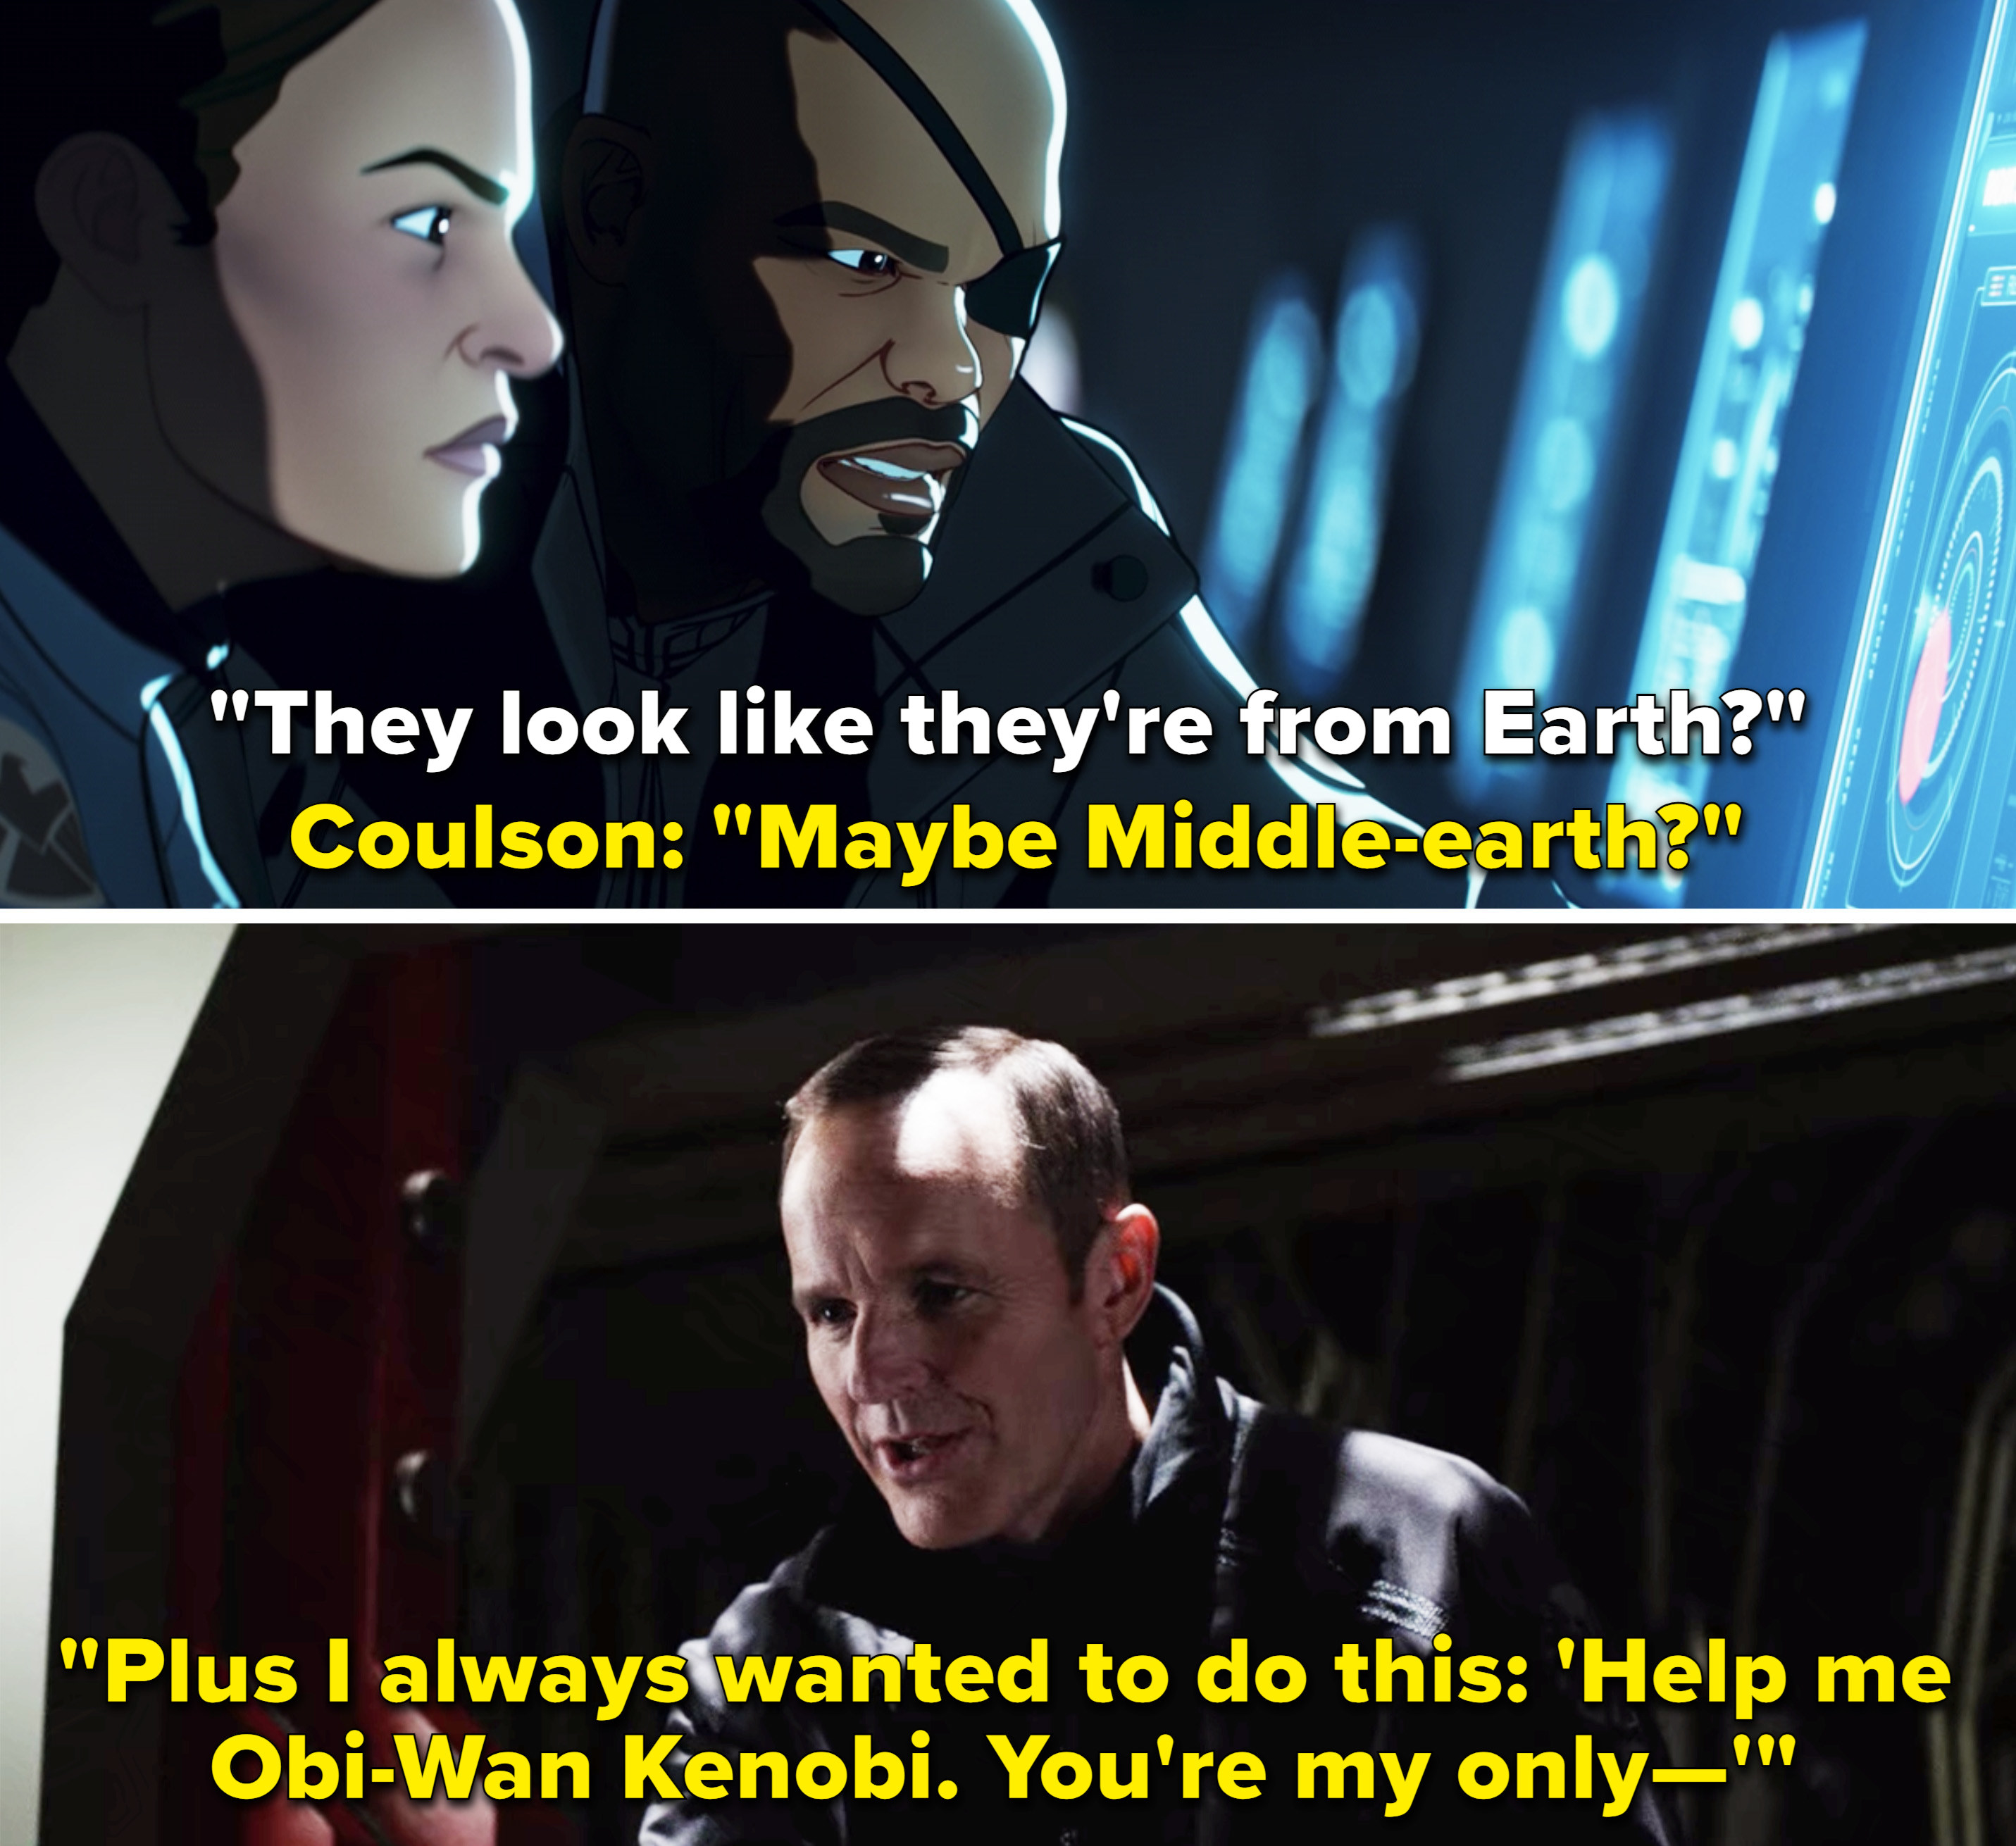 Coulson mentioning Middle-earth vs. Coulson mentioning Obi-Wan Kenobi